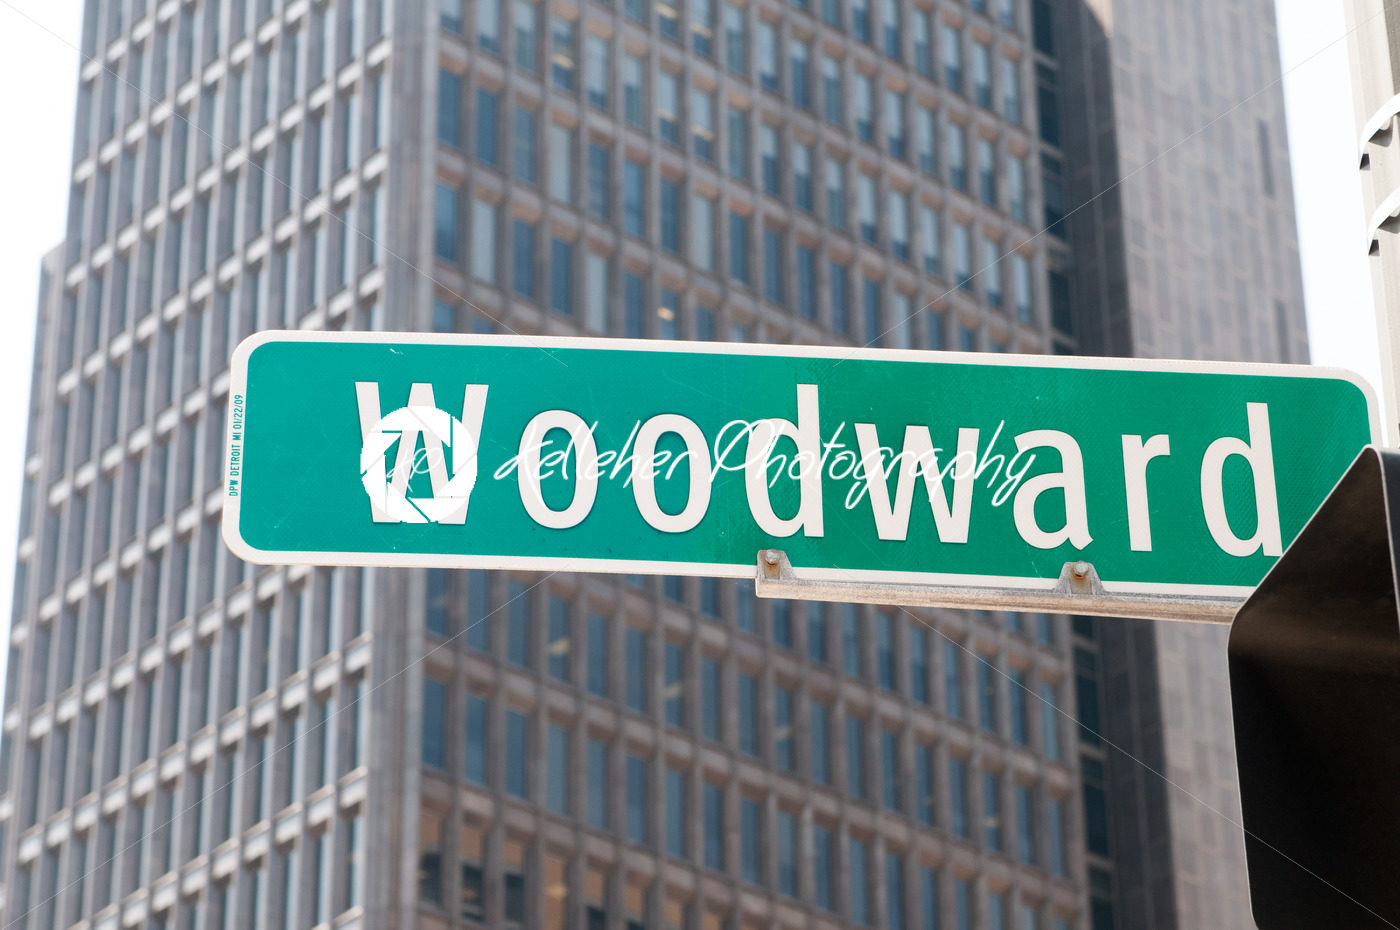 Street sign for Woodward Avenue, a main thoroughfare in the City of Detroit, Michigan. - Kelleher Photography Store